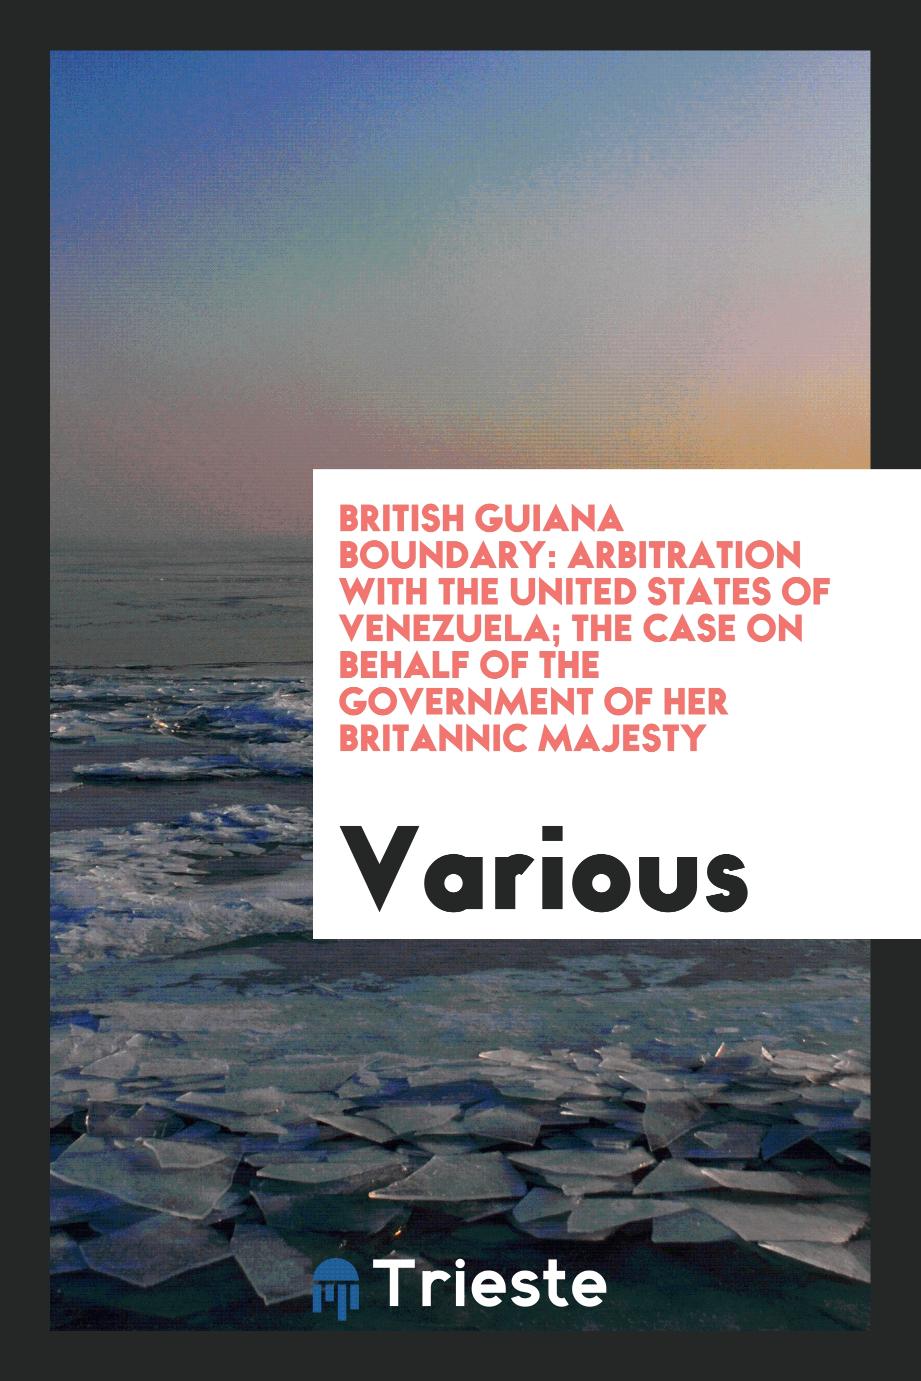 British Guiana Boundary: Arbitration with the United States of Venezuela; The Case on Behalf of the Government of Her Britannic Majesty